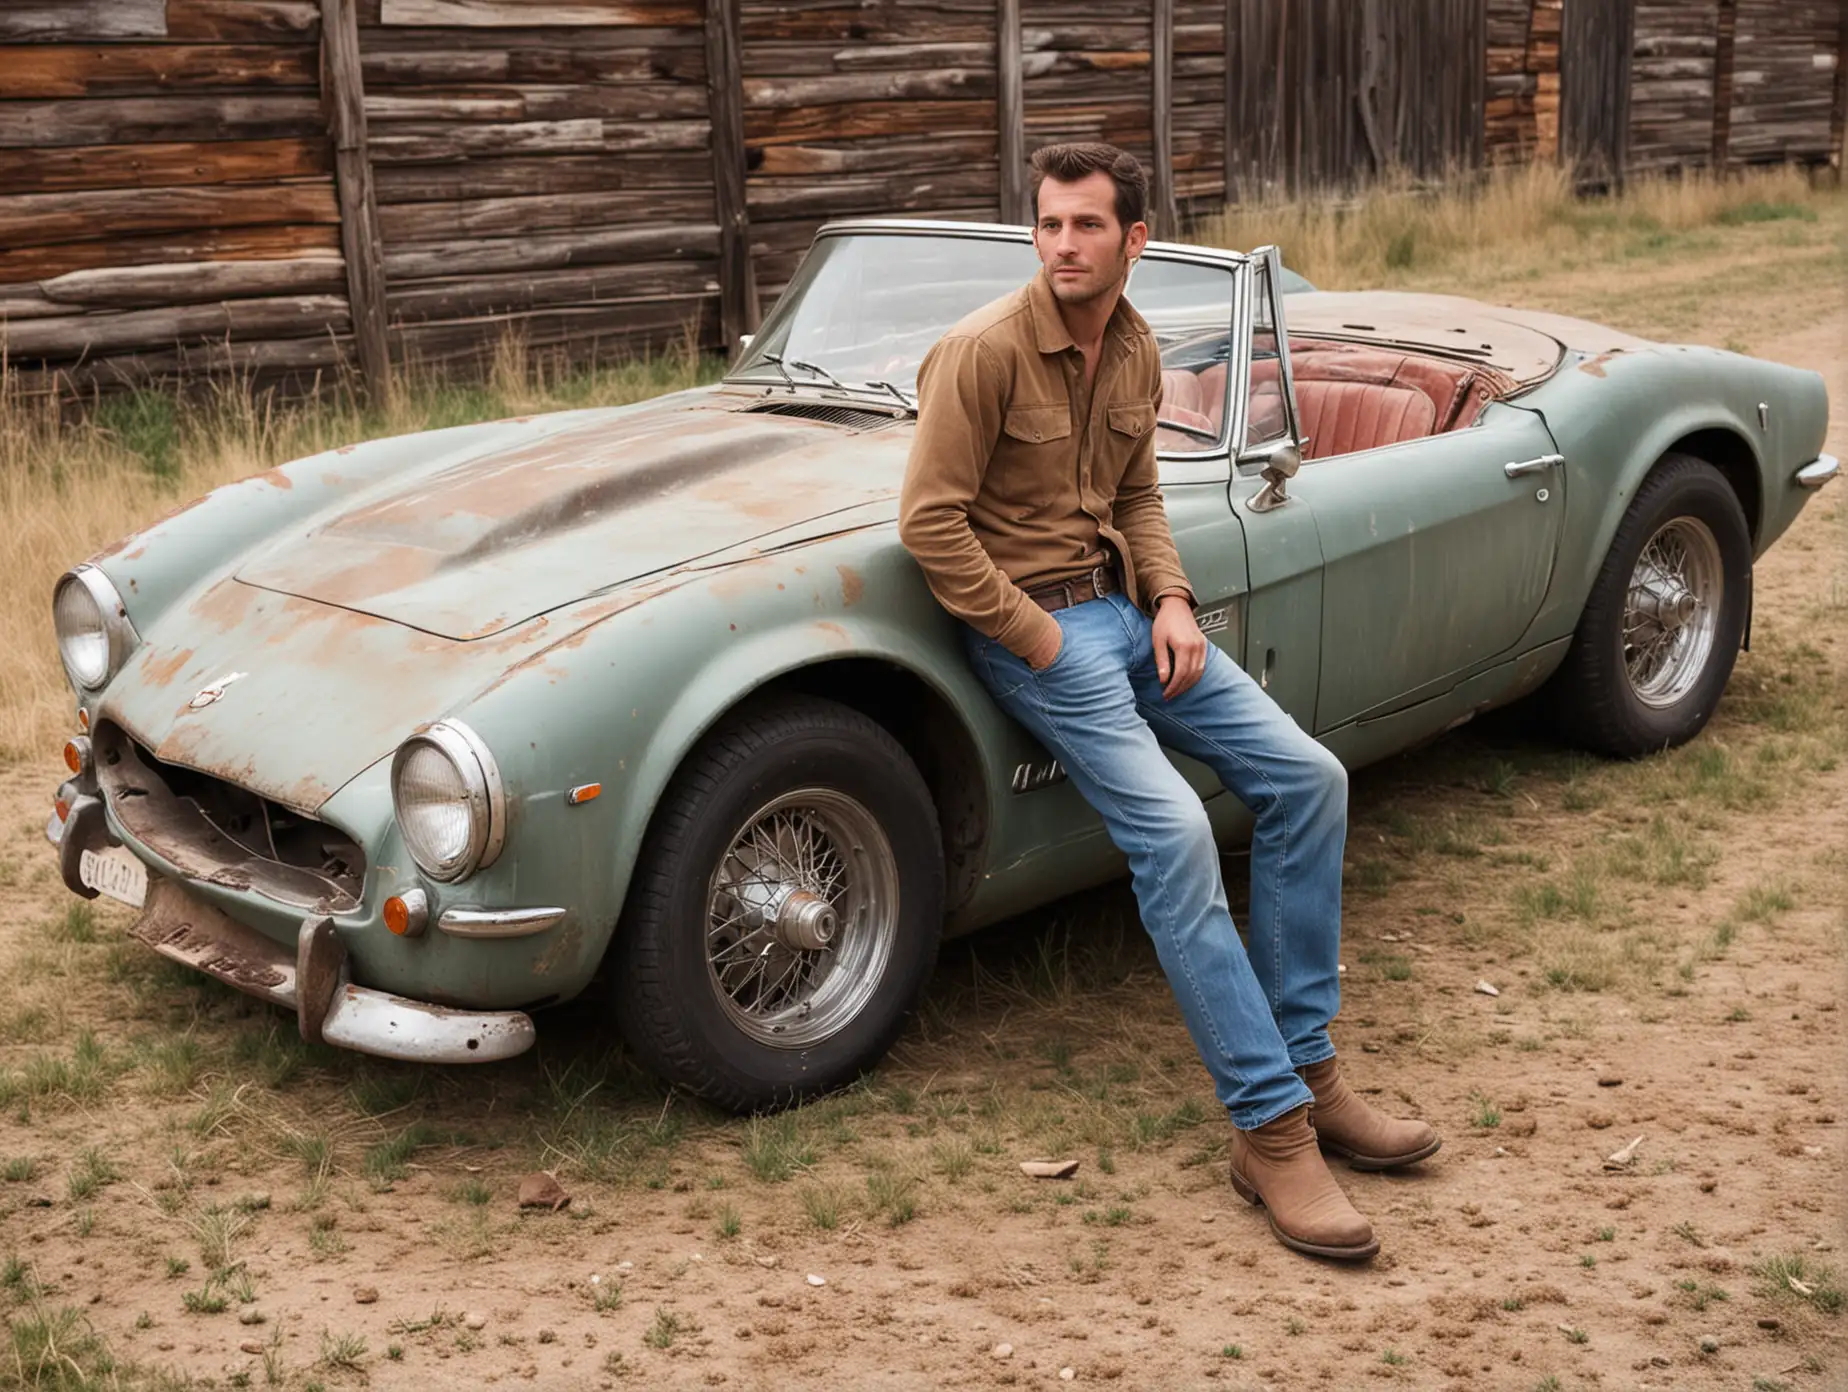 Vintage Sports Car with Relaxed Cowboy